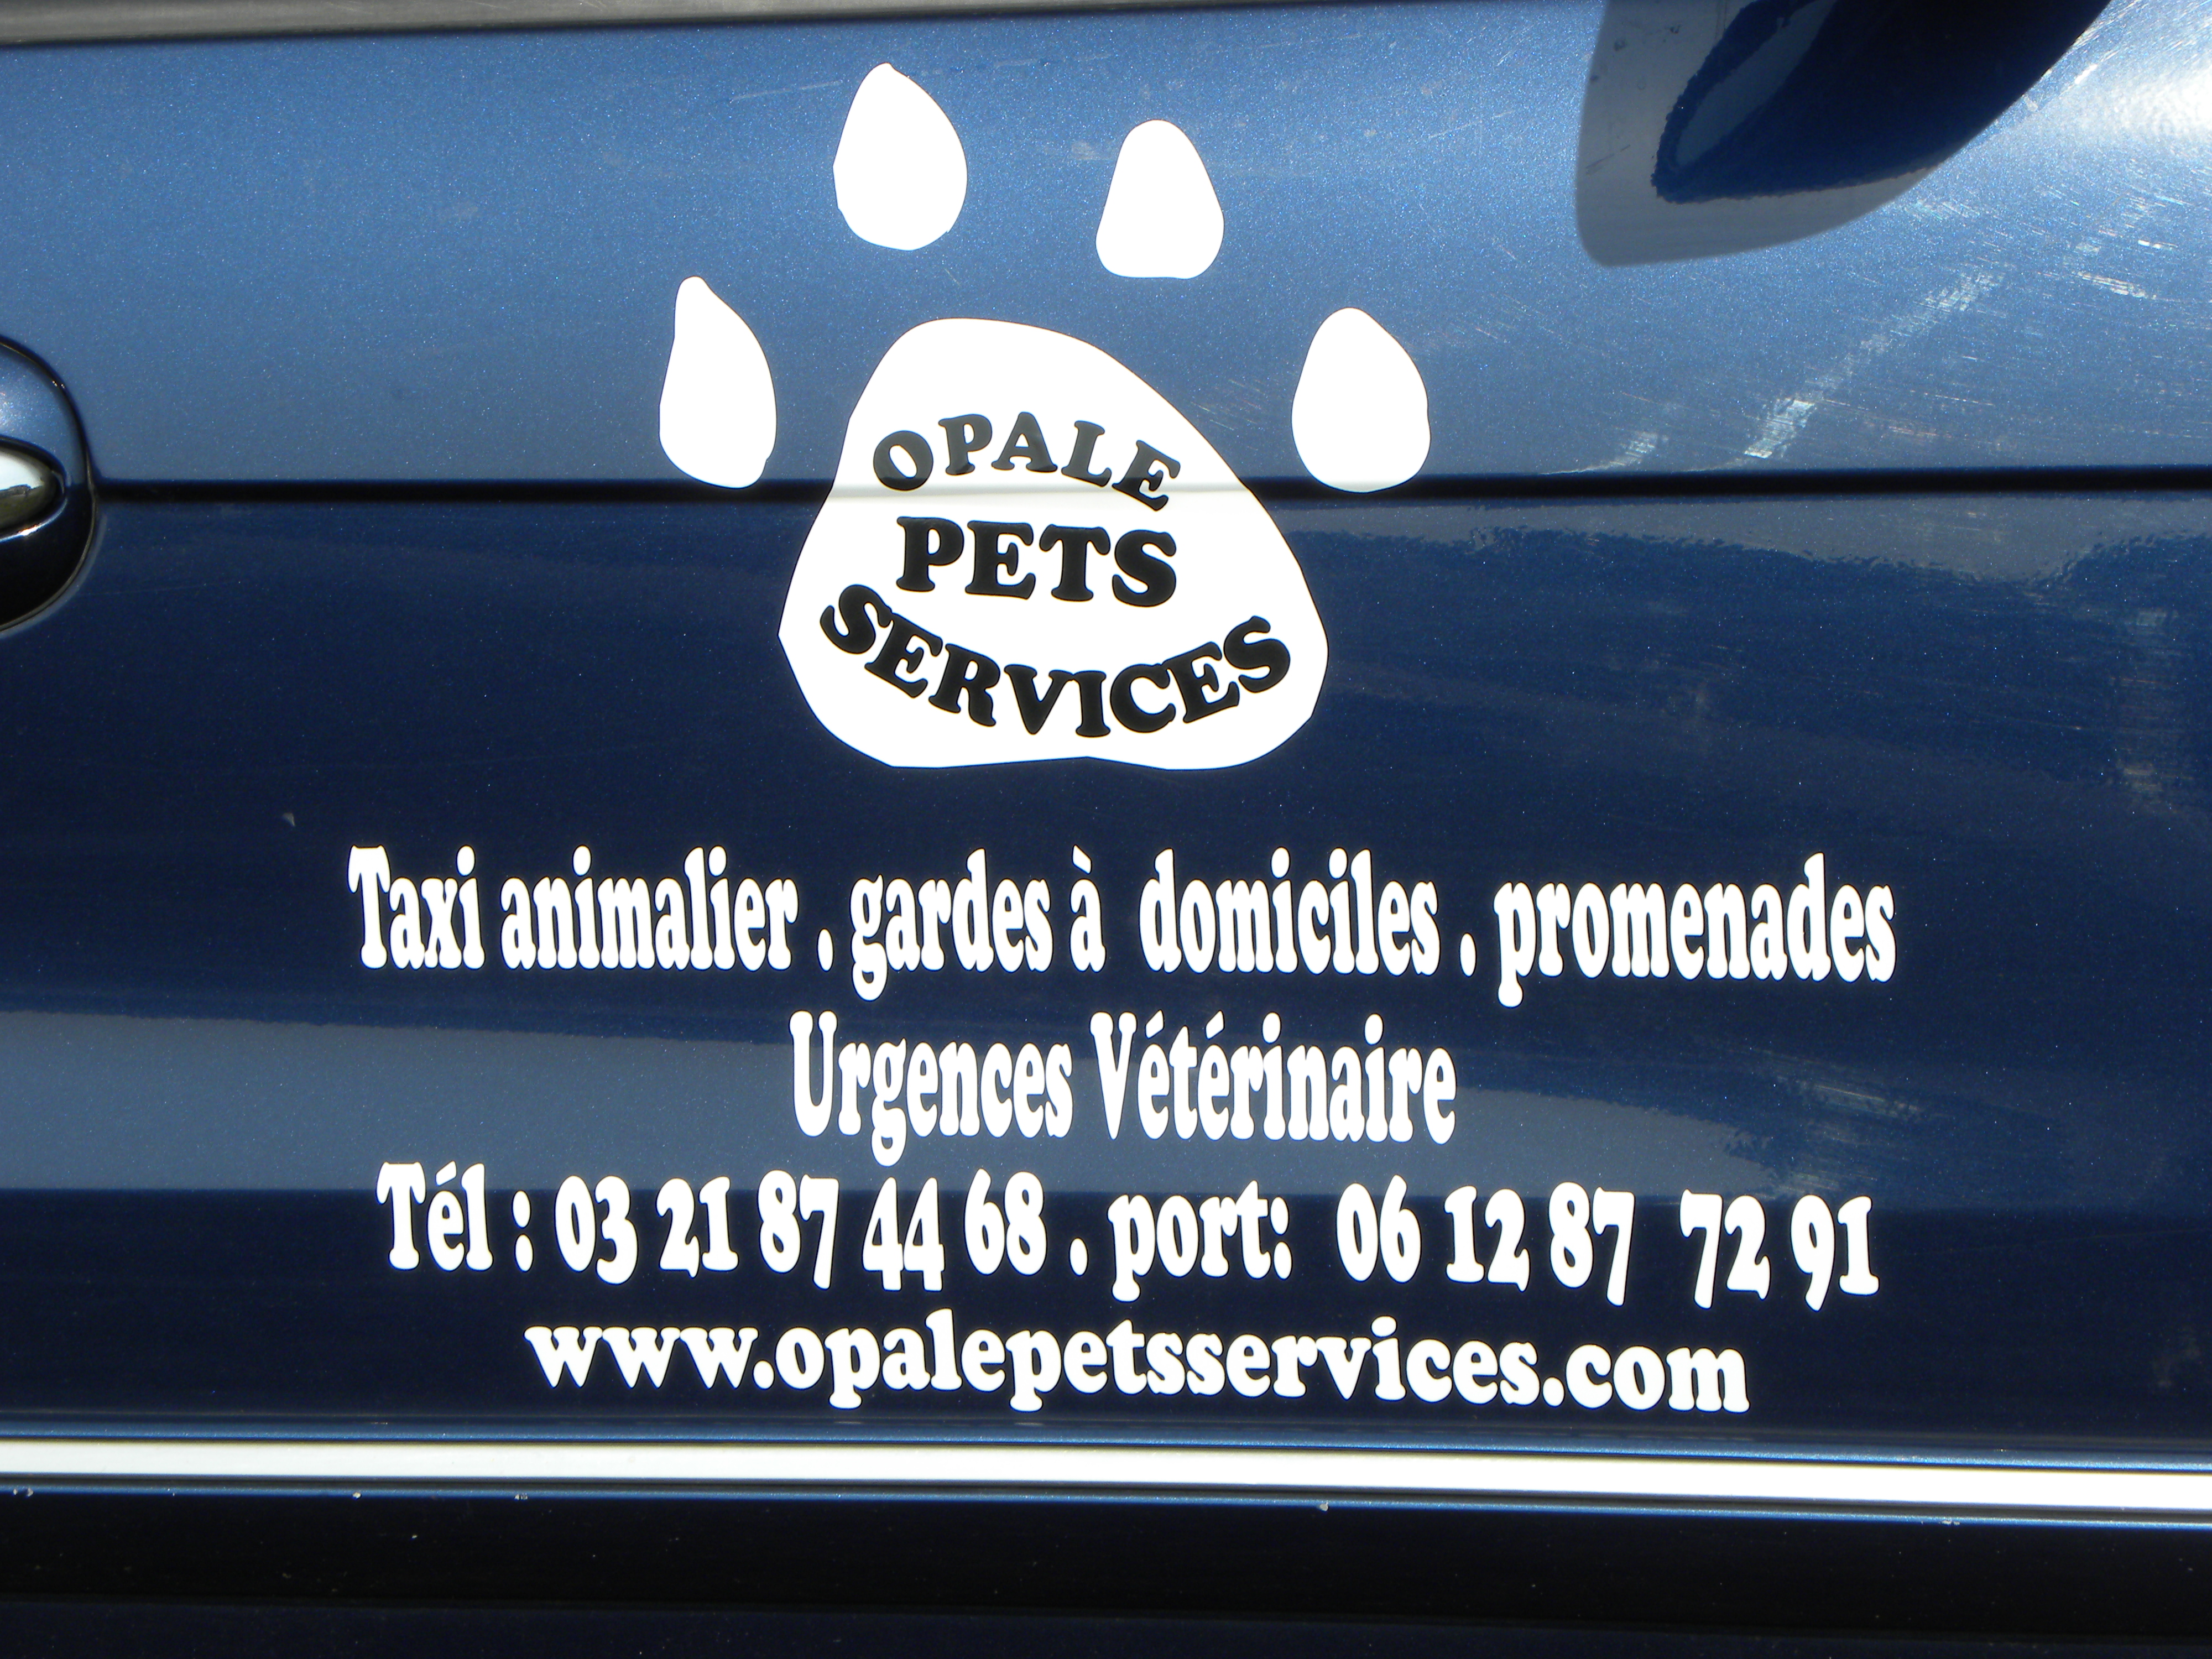 Opale Pets Services Taxi Animalier